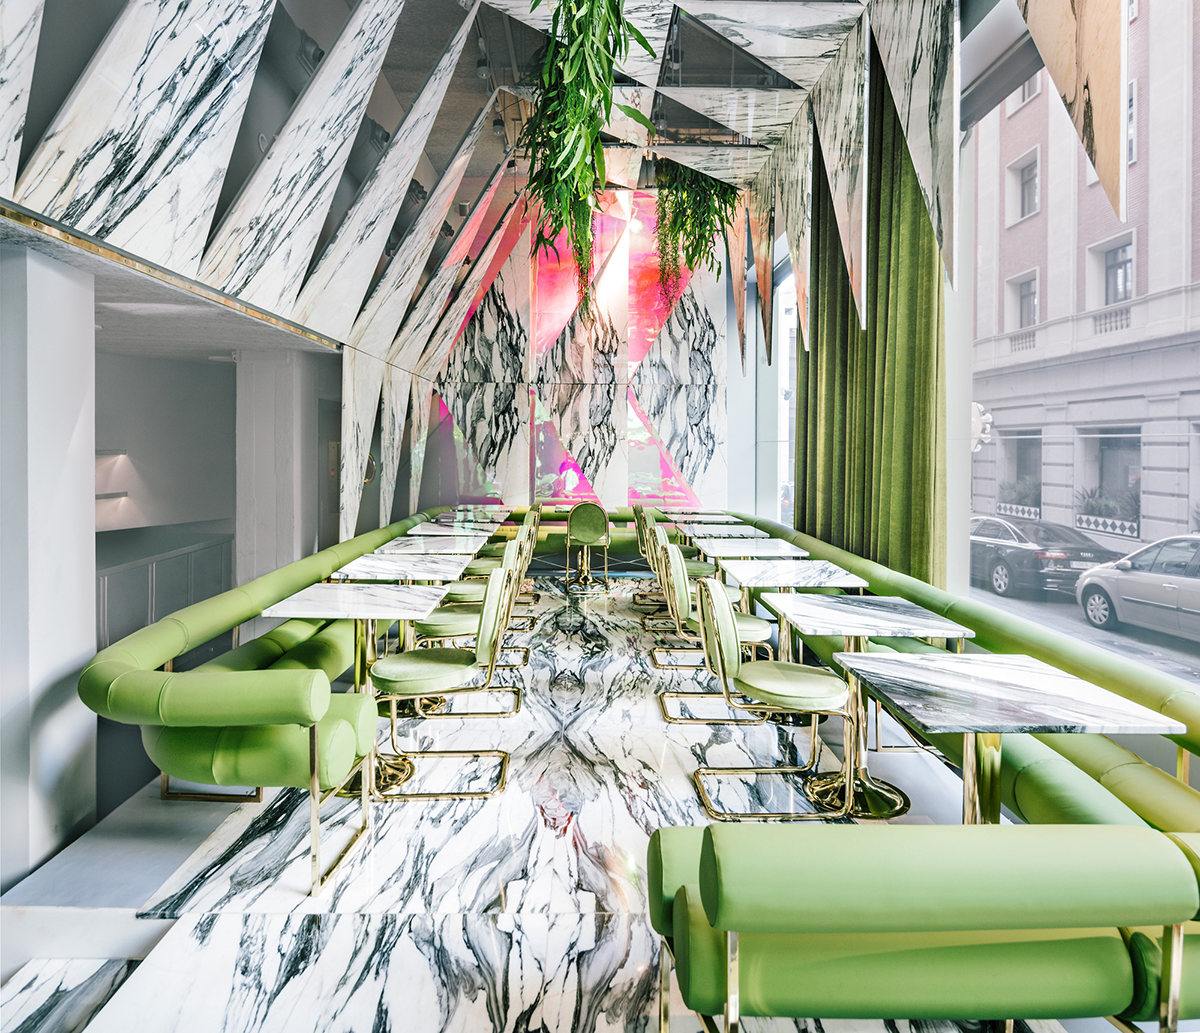 Ròmola Restaurant and Café in Madrid by Andrés Jaque